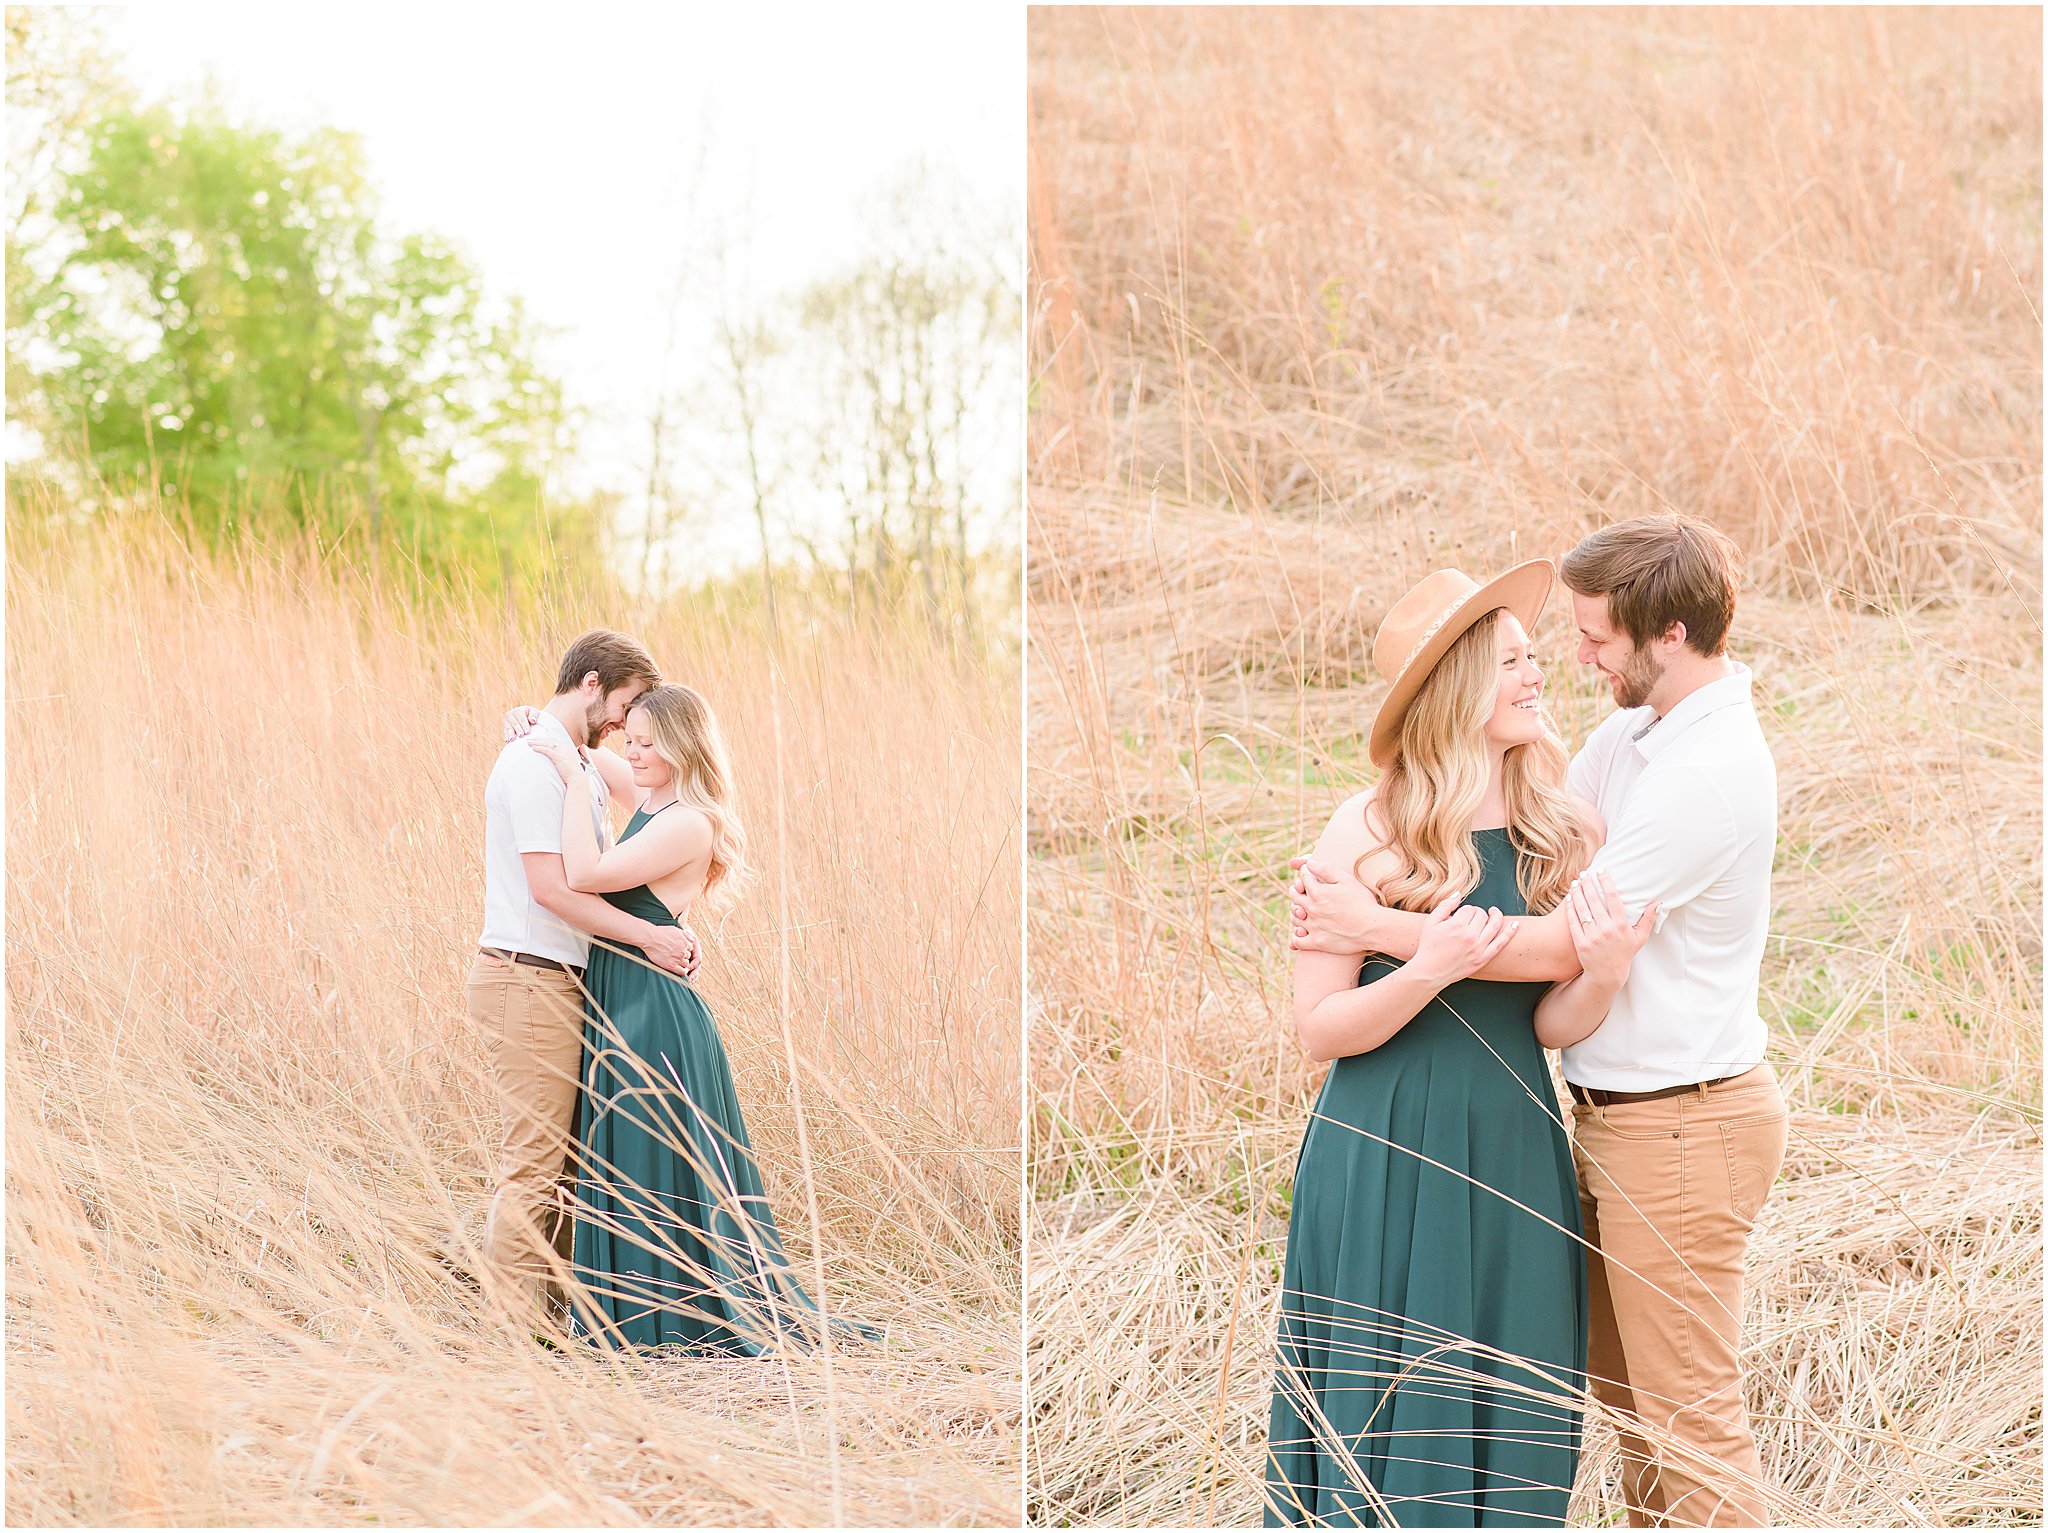 Couple cuddling in sun-drenched field during Eagle Creek Park Engagement Session